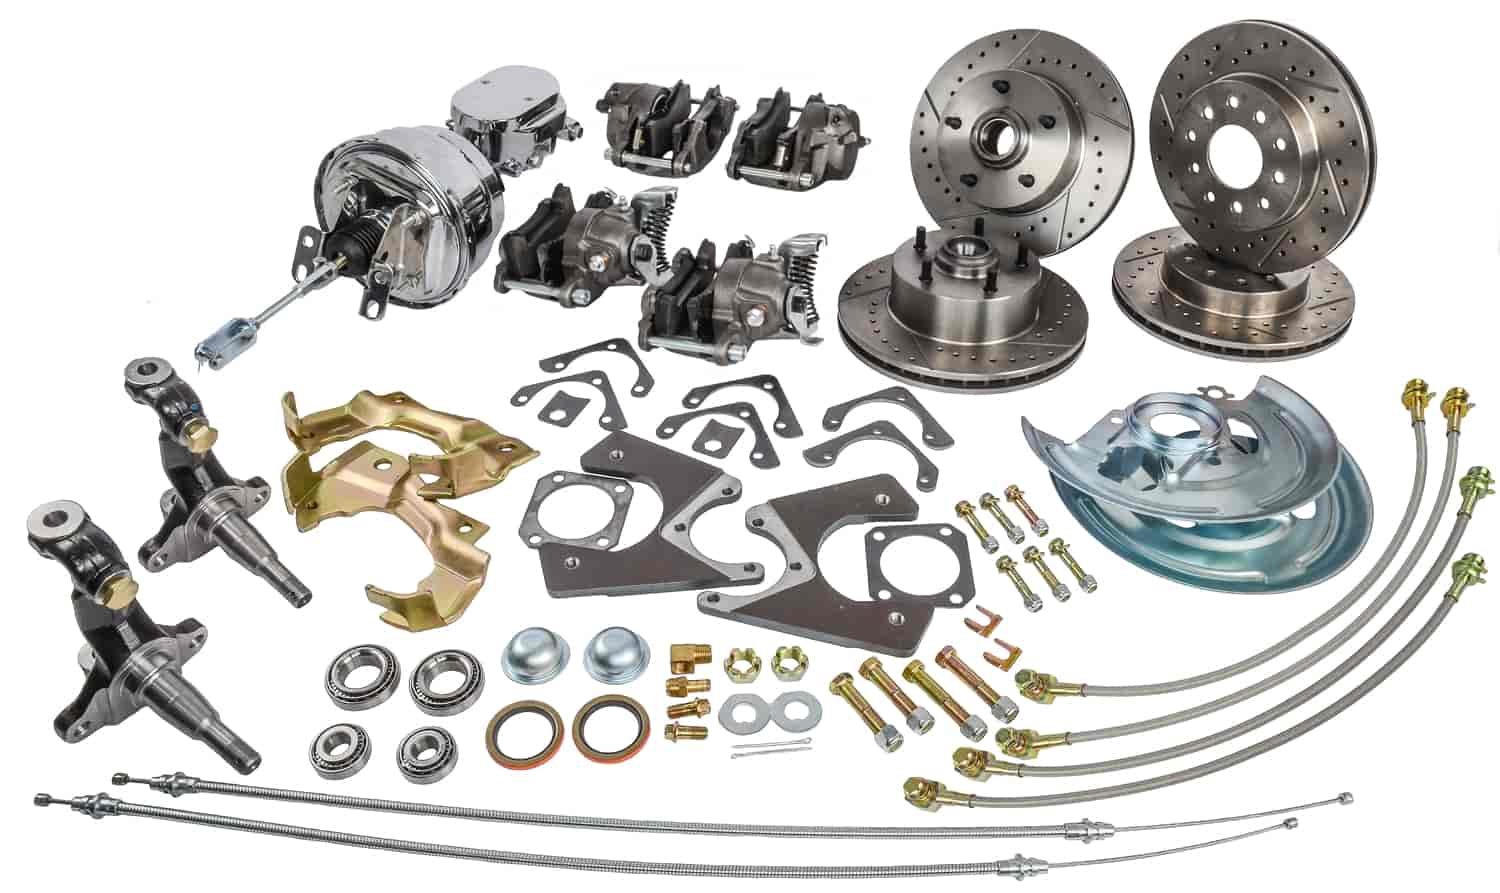 All-Wheel Disc Brake Conversion Kit GM Staggered Shock Configuration